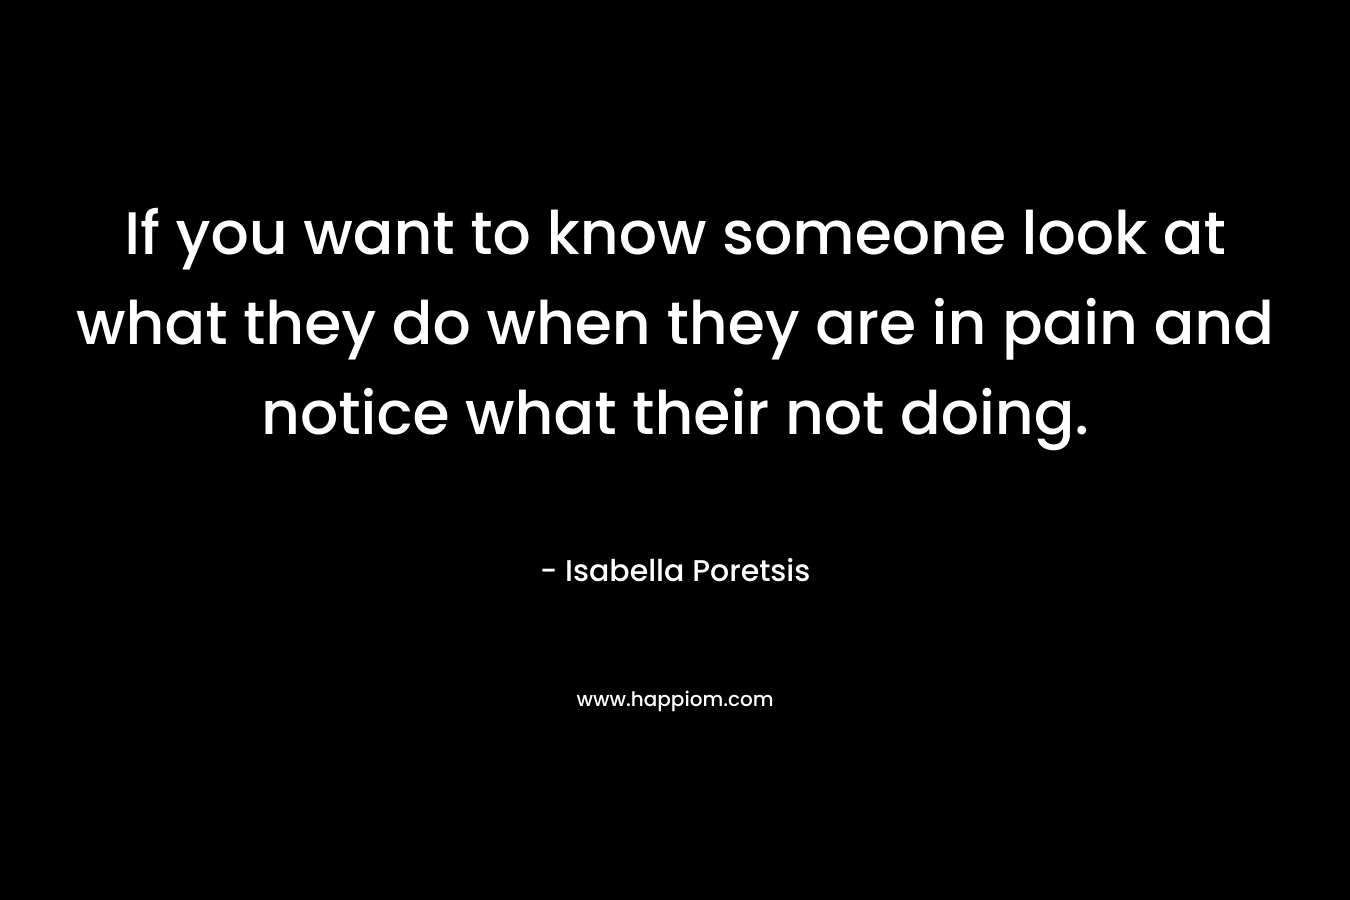 If you want to know someone look at what they do when they are in pain and notice what their not doing.